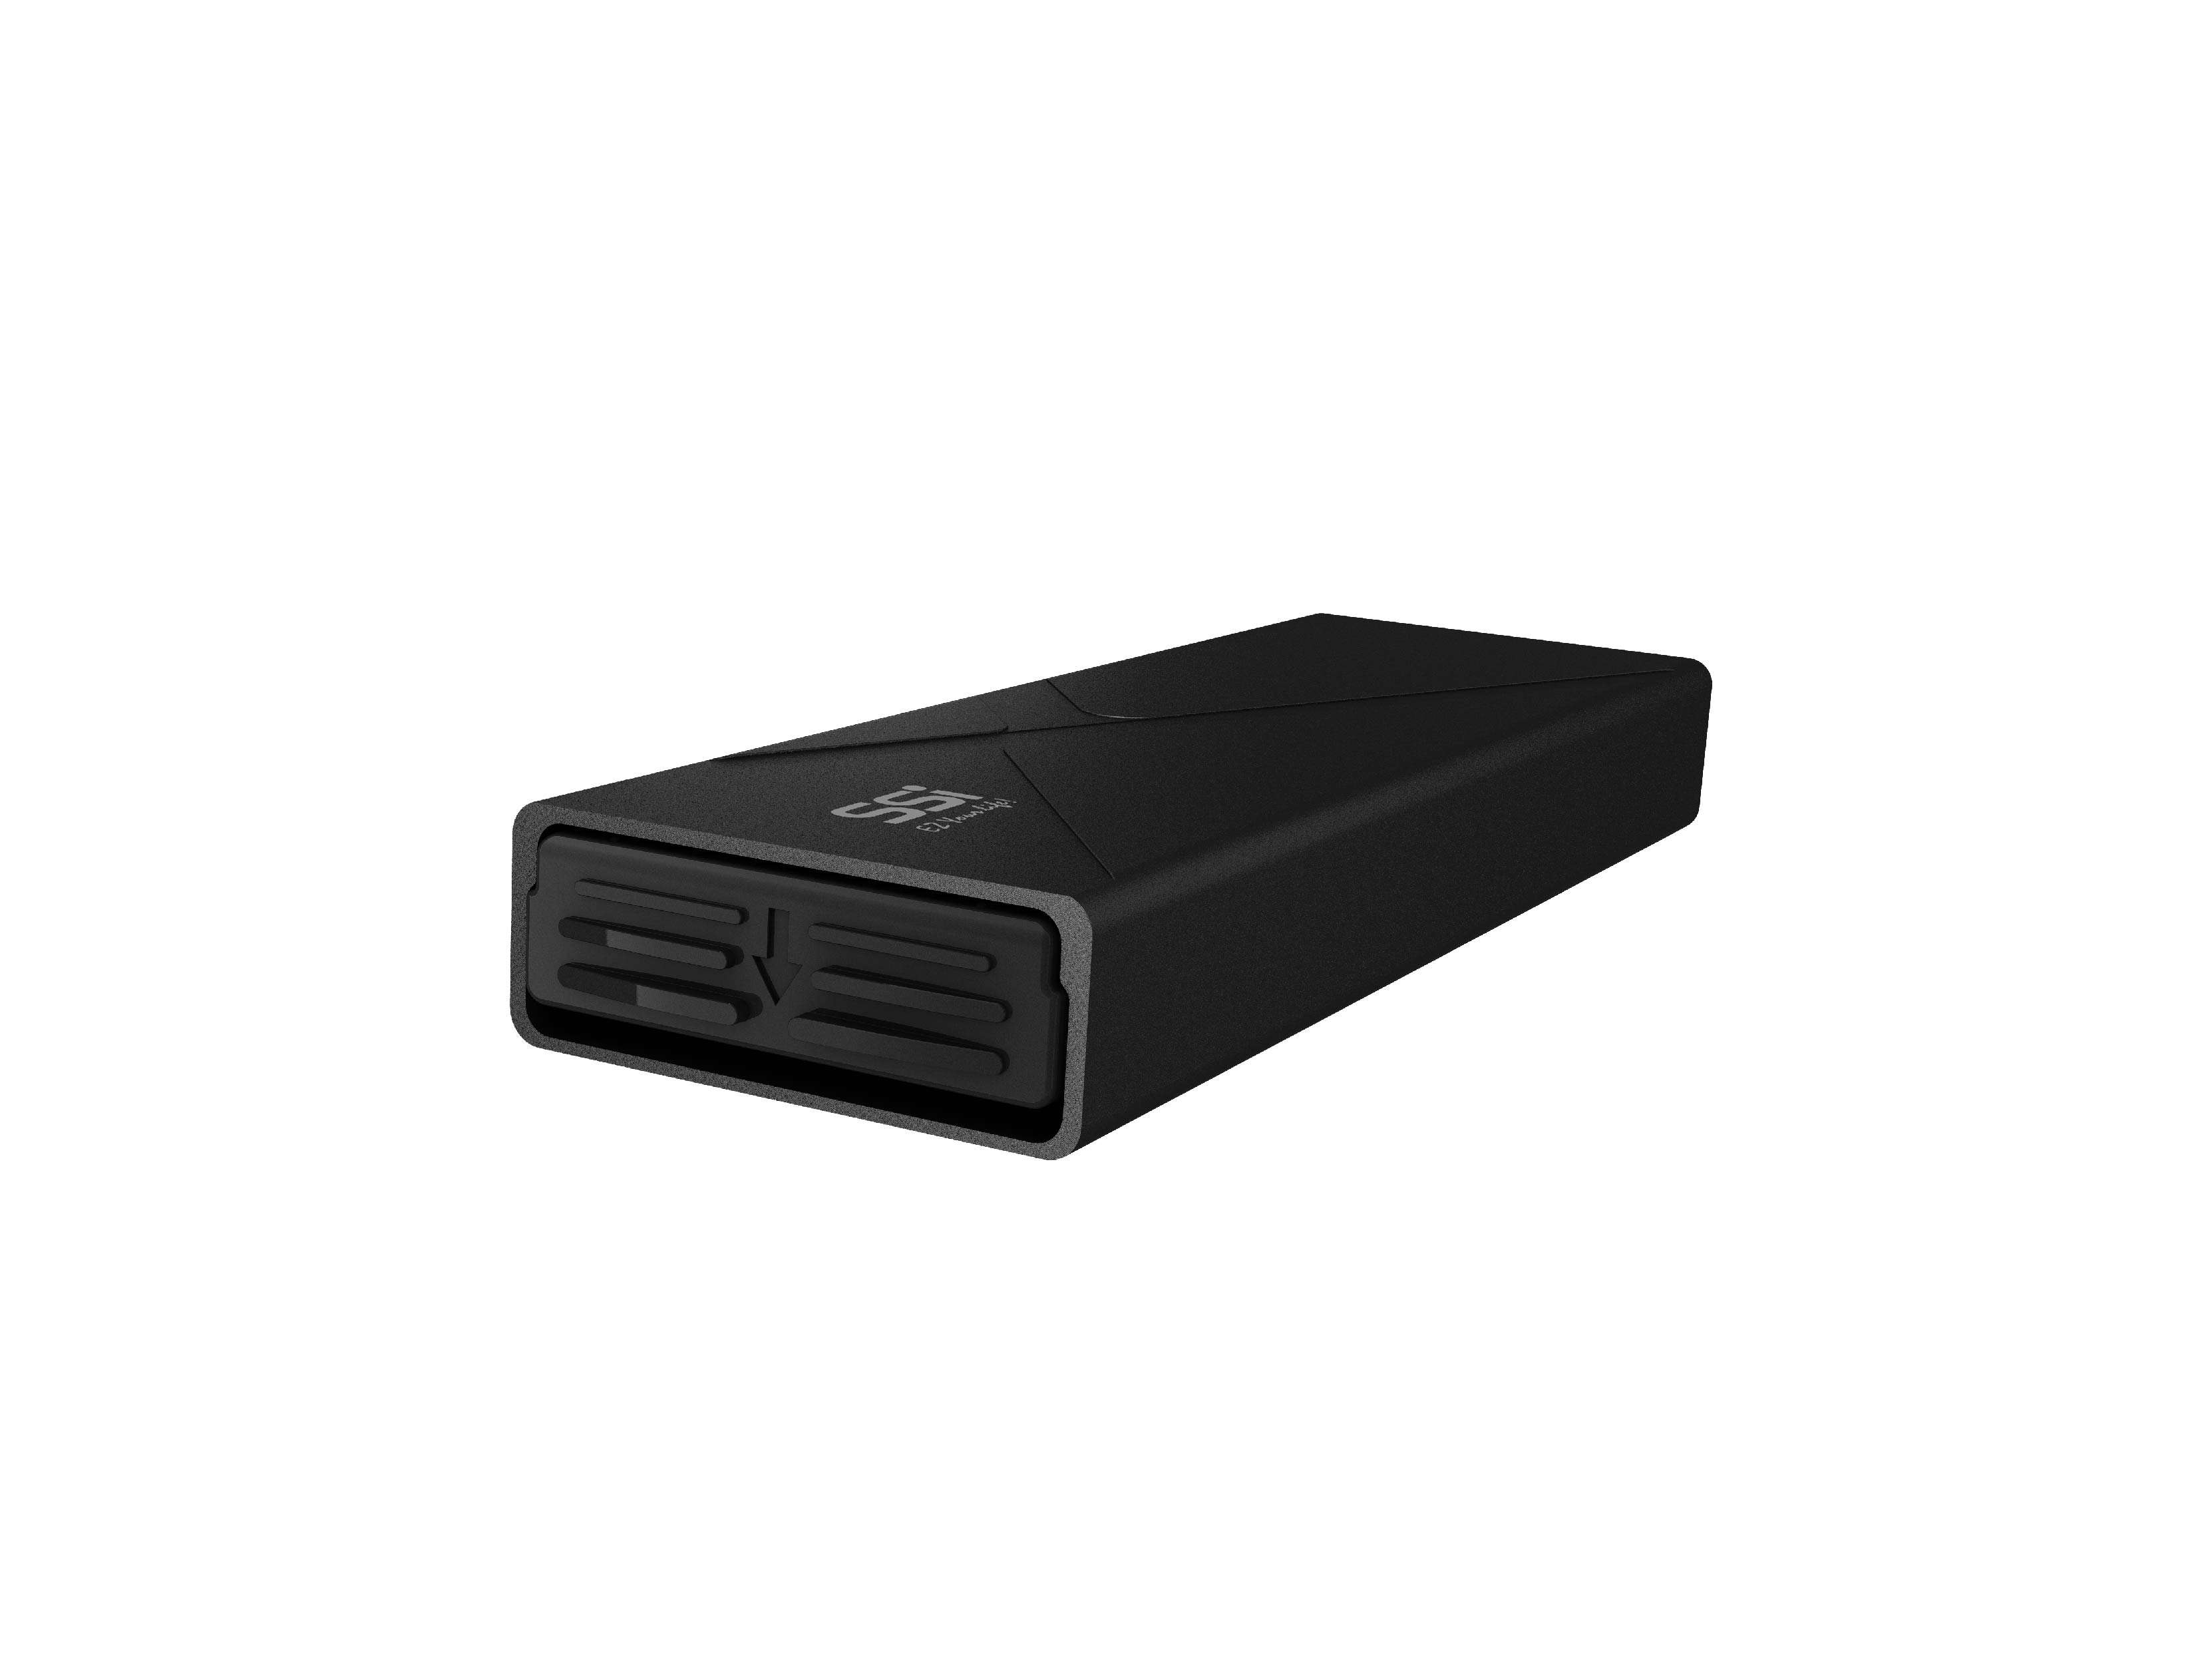 M.2 NVMe/SATA SSD Enclosure, Styling Design (SI-8613US31C), compatible with 1x M.2 NVMe PCIe SSD, USB3.2-C 10Gbps to host.